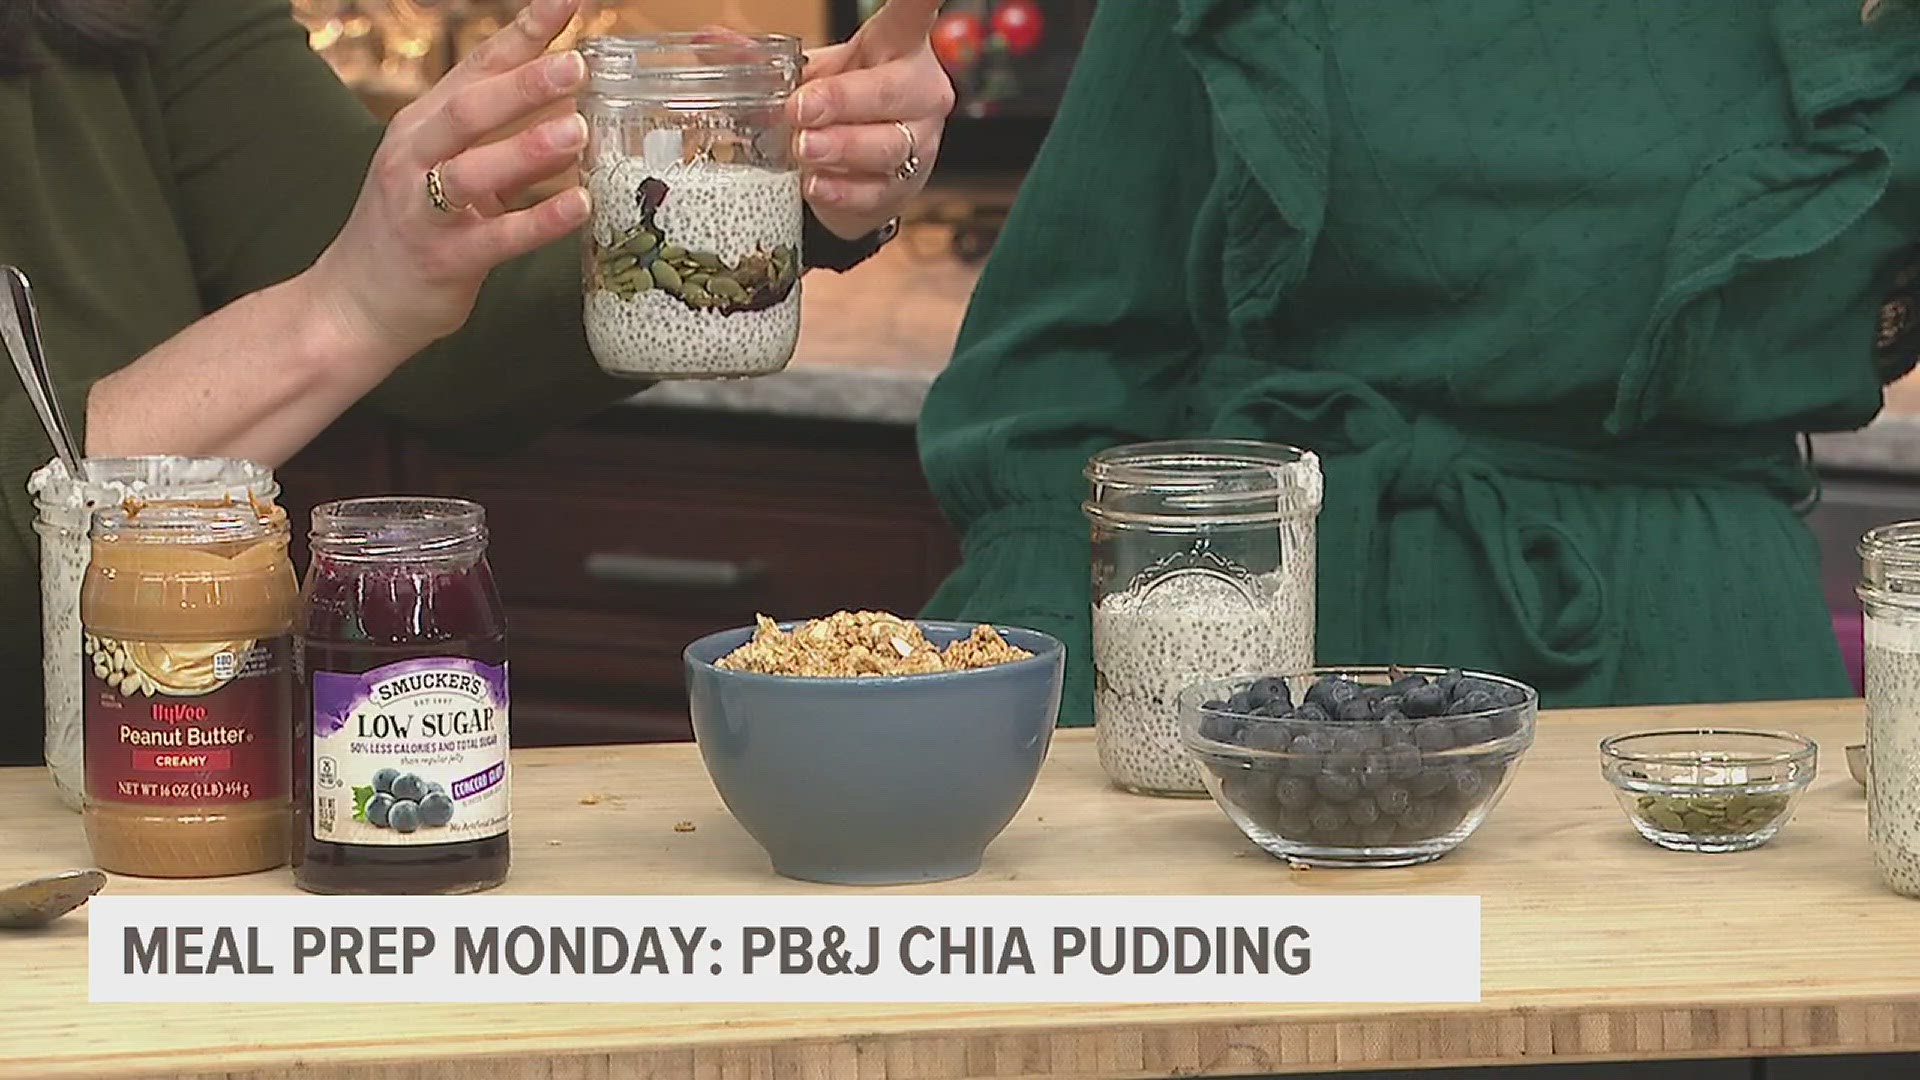 Searching for your new favorite sweet snack? We've got the answer. Peanut butter and jelly pairs beautifully with berries and yogurt in this delicious parfait!